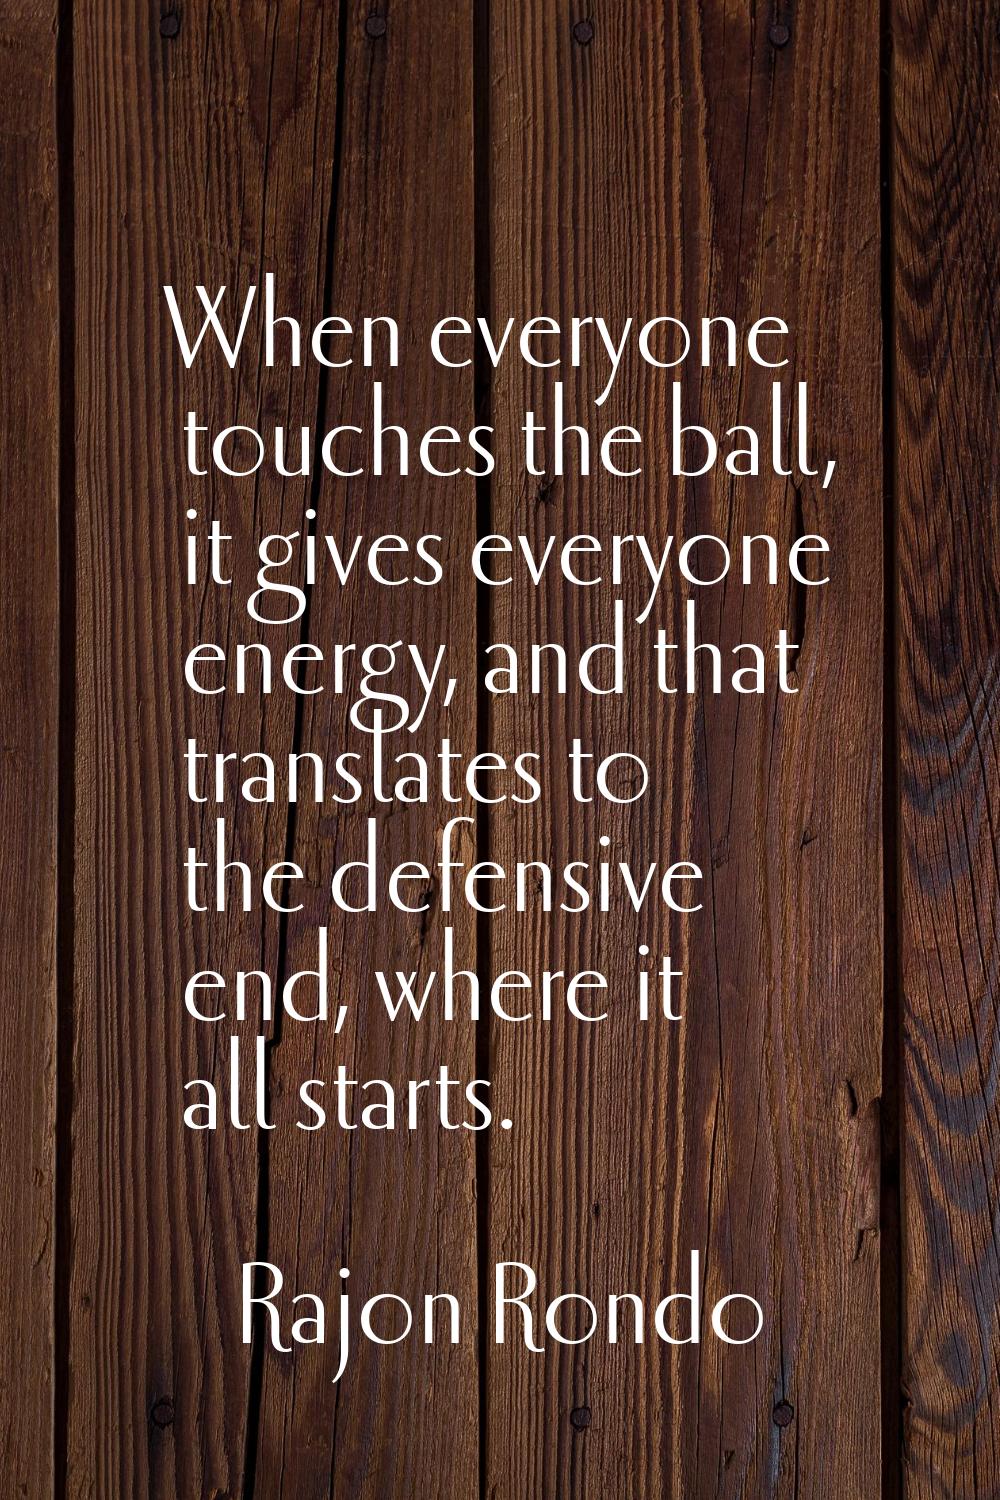 When everyone touches the ball, it gives everyone energy, and that translates to the defensive end,